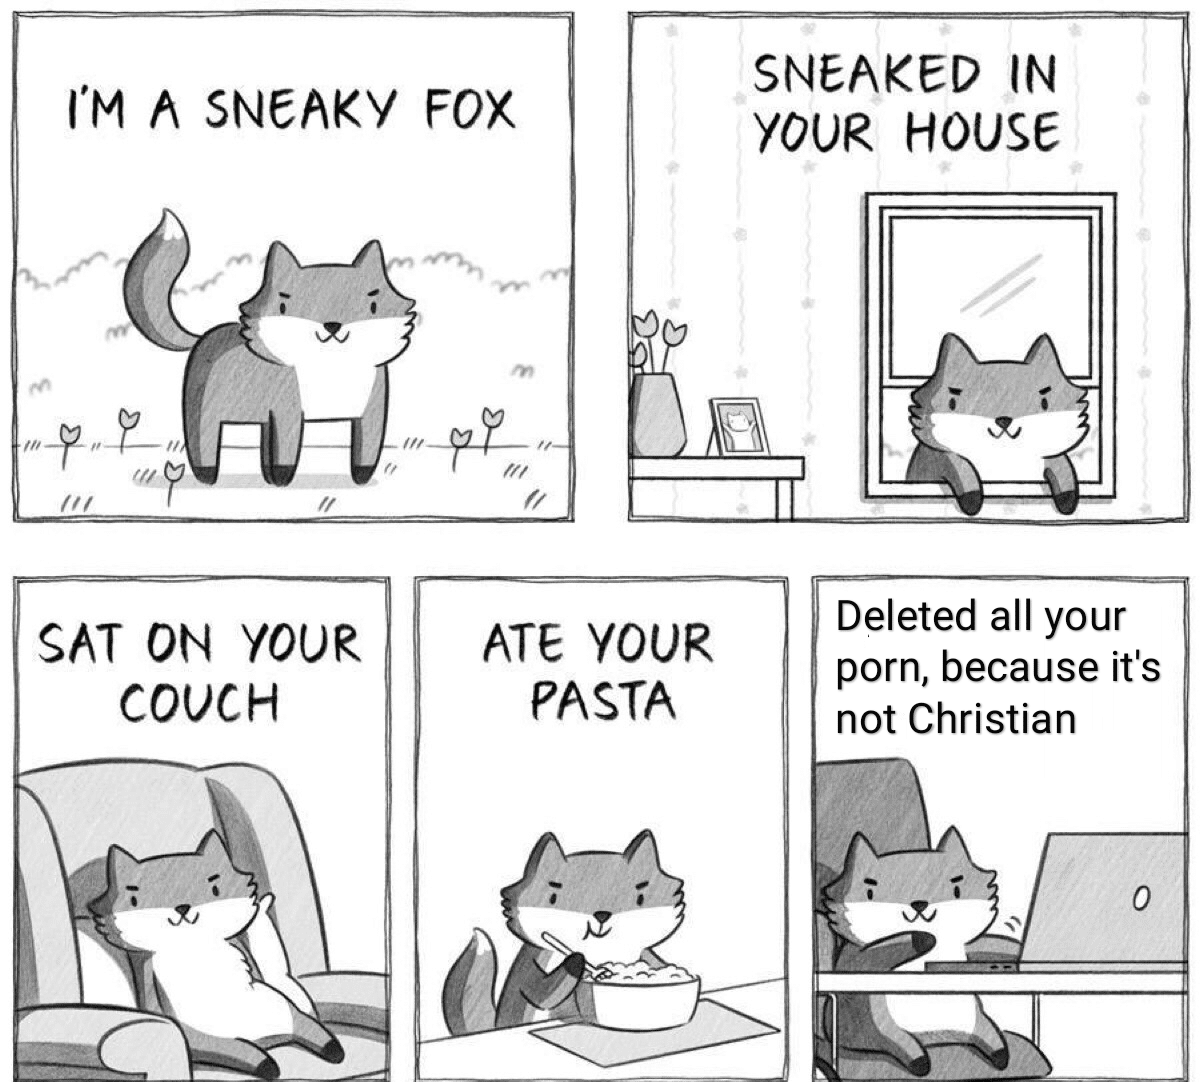 christian christian-memes christian text: I'M A SN€AKY FOX SAT ON YOUR COVCH ATE YOUR PASTA SNEAKED IN YOUR HOUSE Deleted all your porn, because it's not Christian 